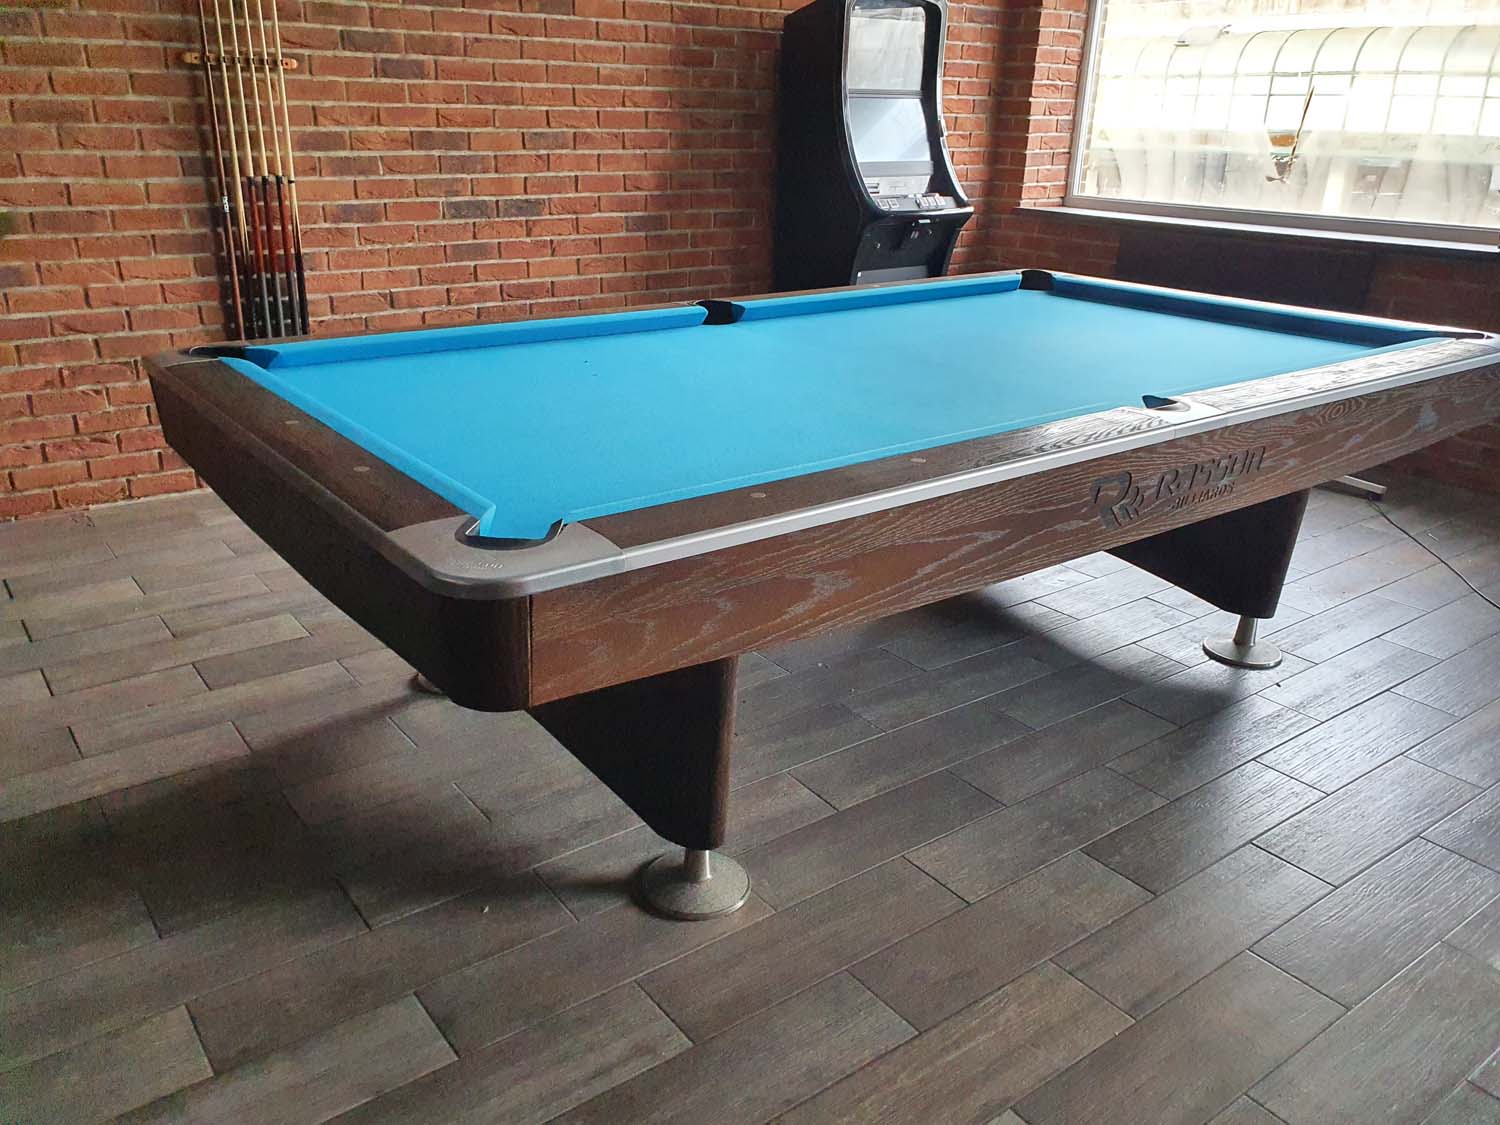 Rasson Challenger 9ft Pool Table - Warehouse Clearance